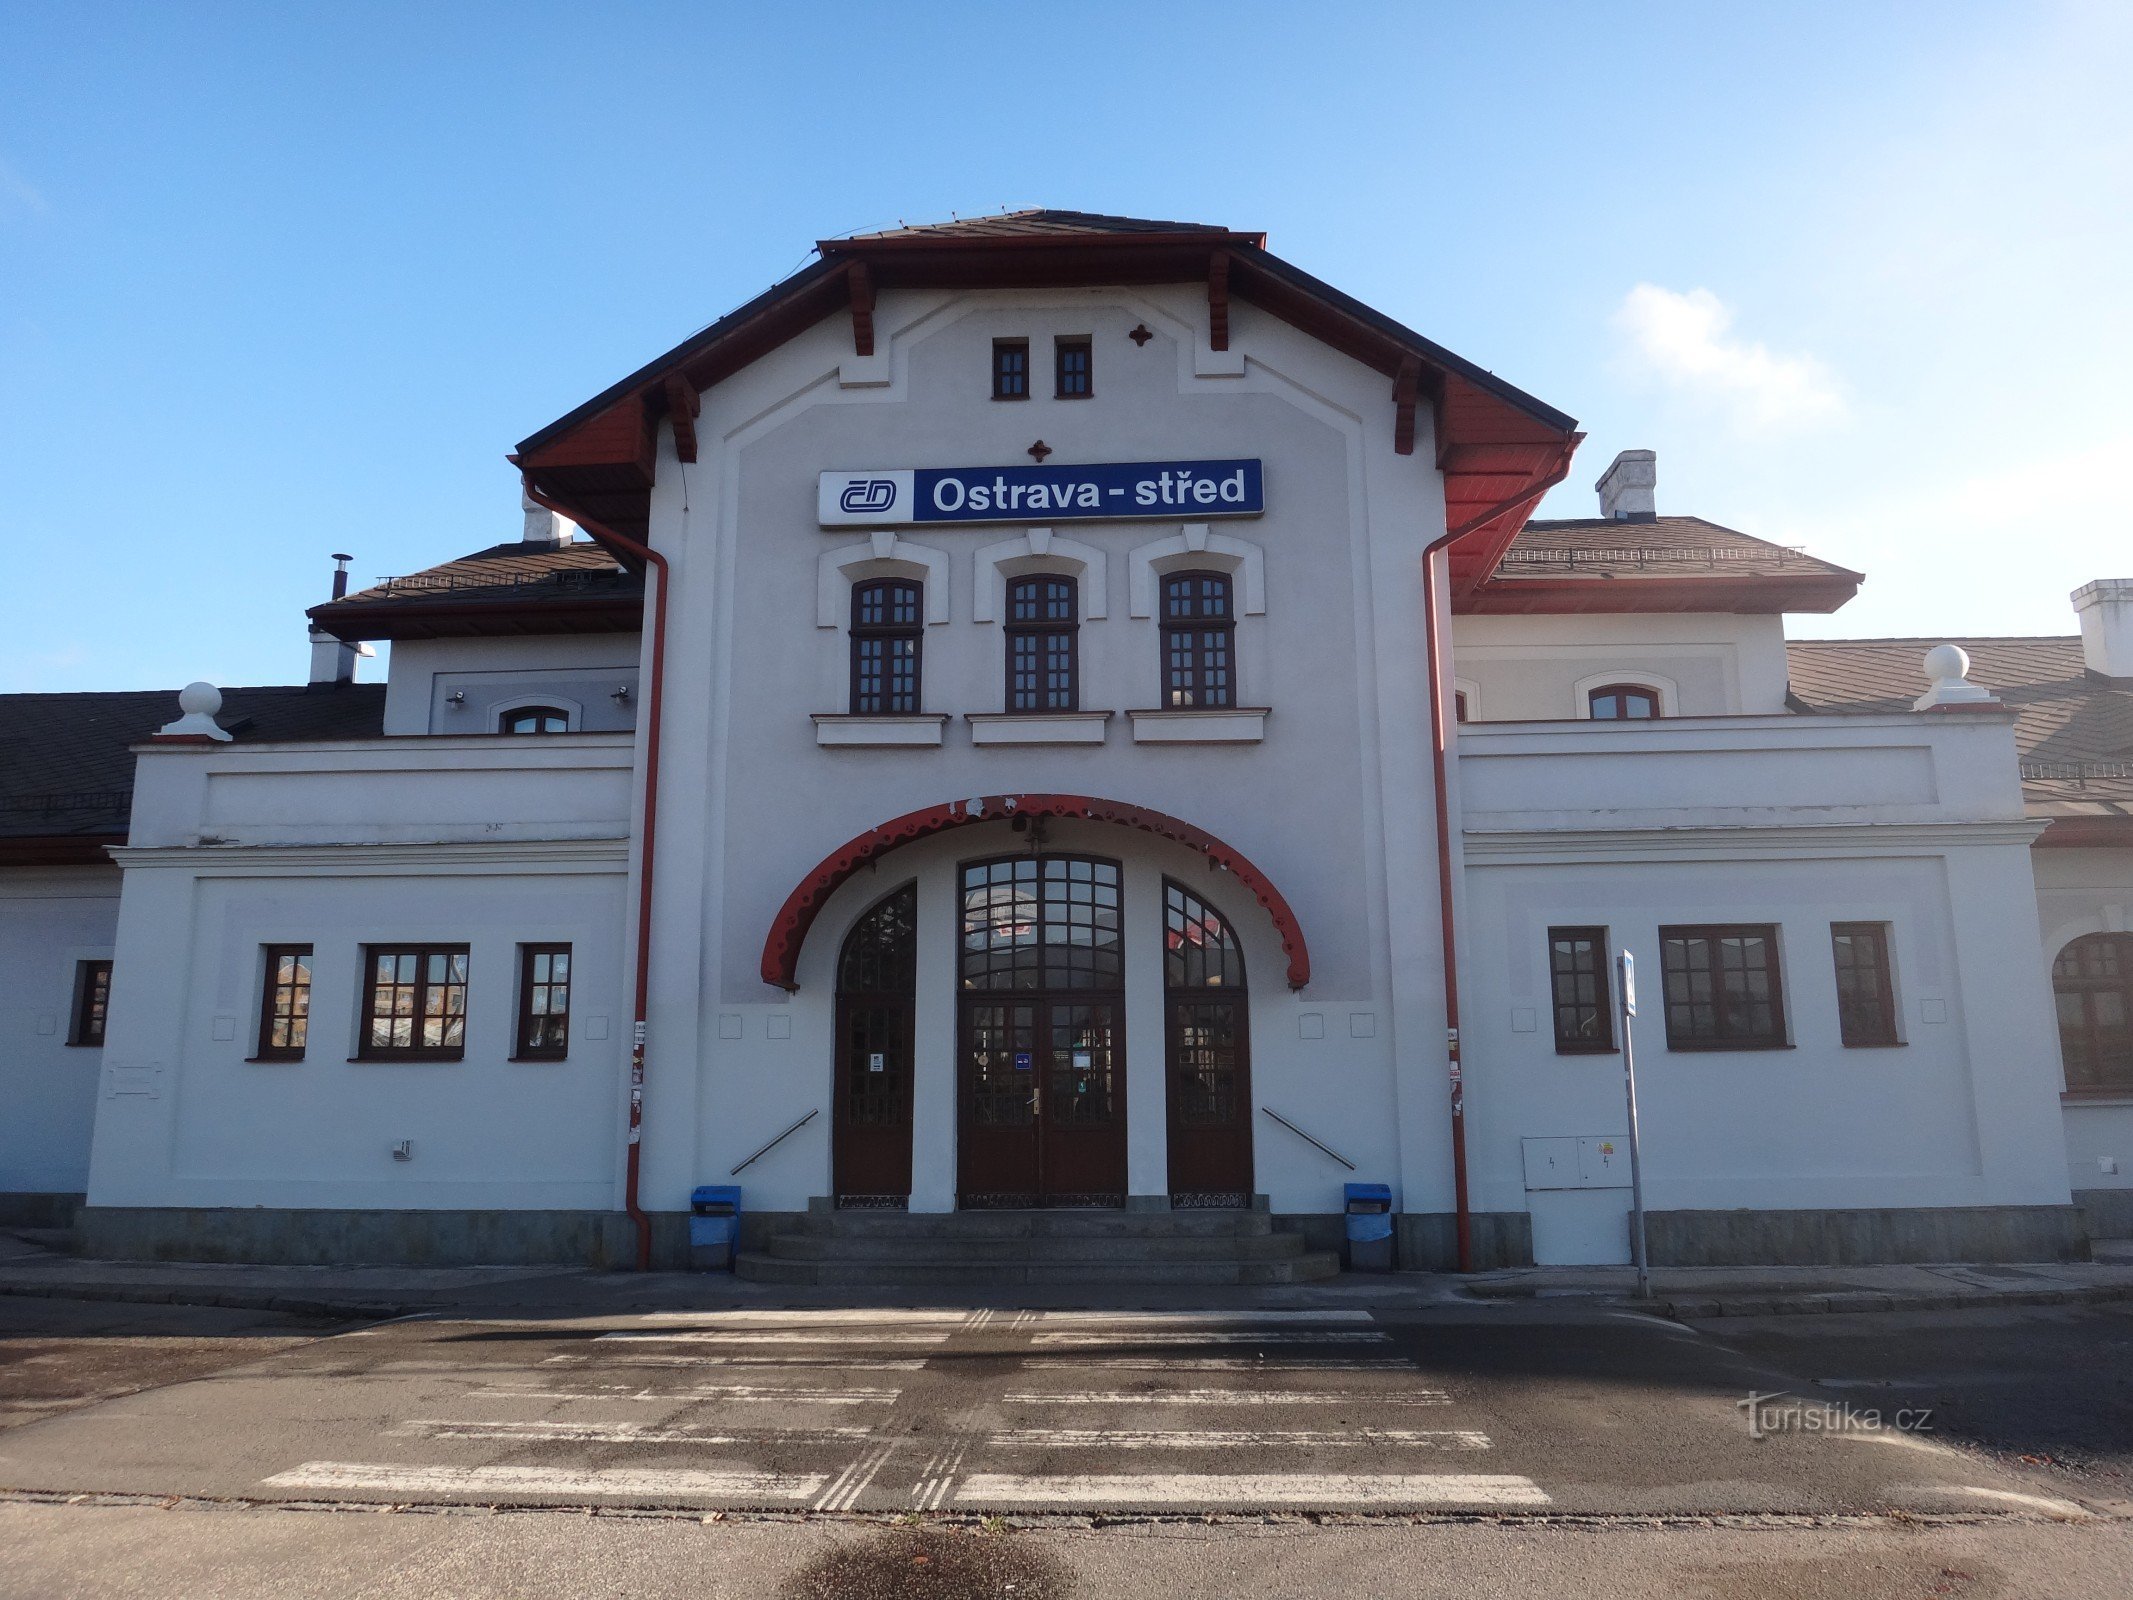 the building of the Ostrava-střed railway station and railway museum